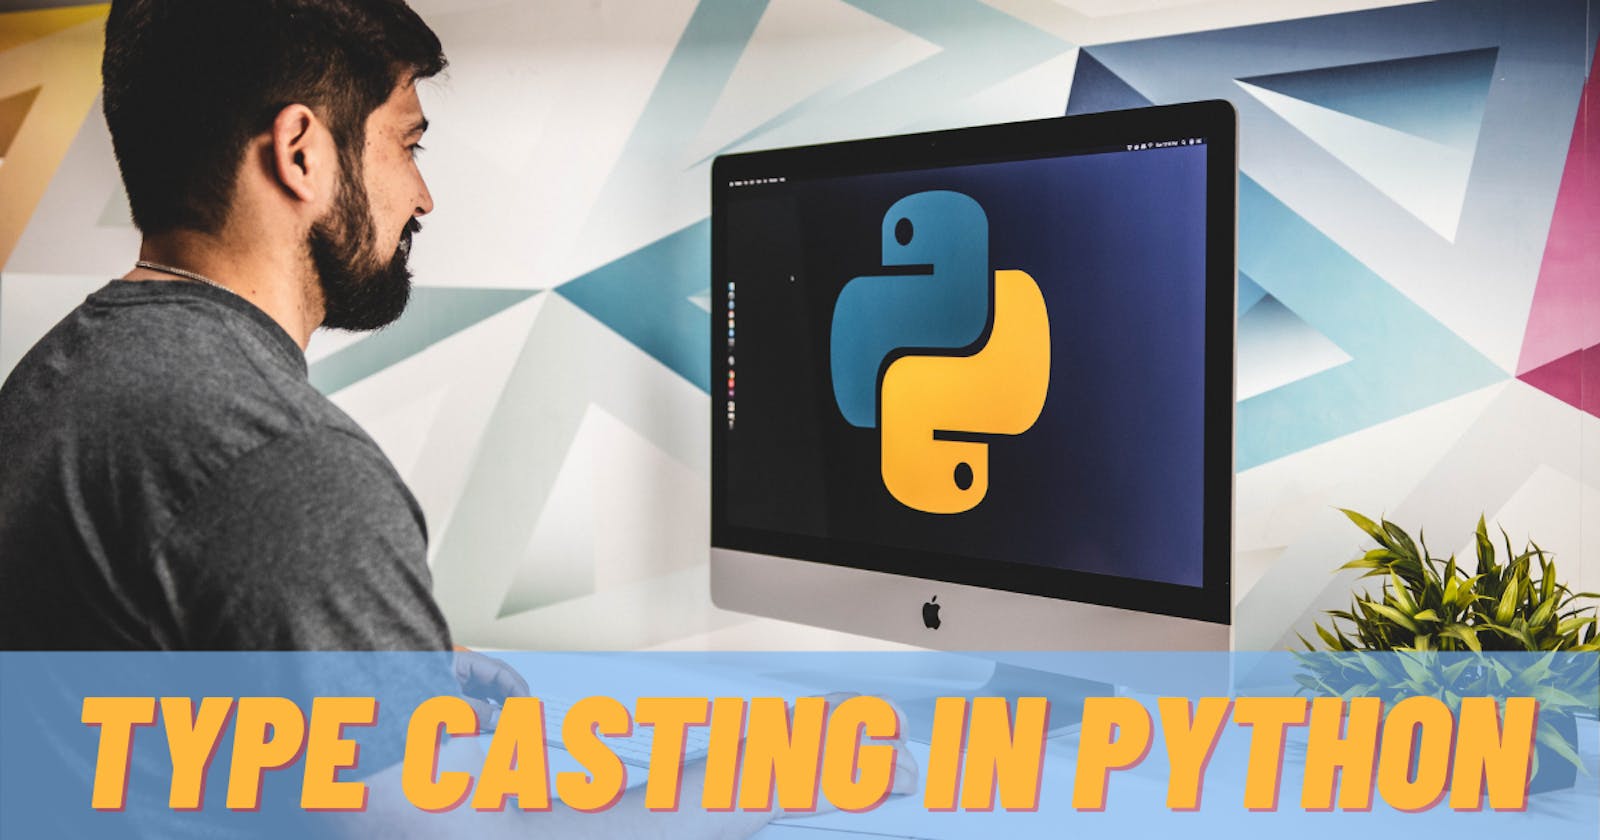 Type Casting in Python